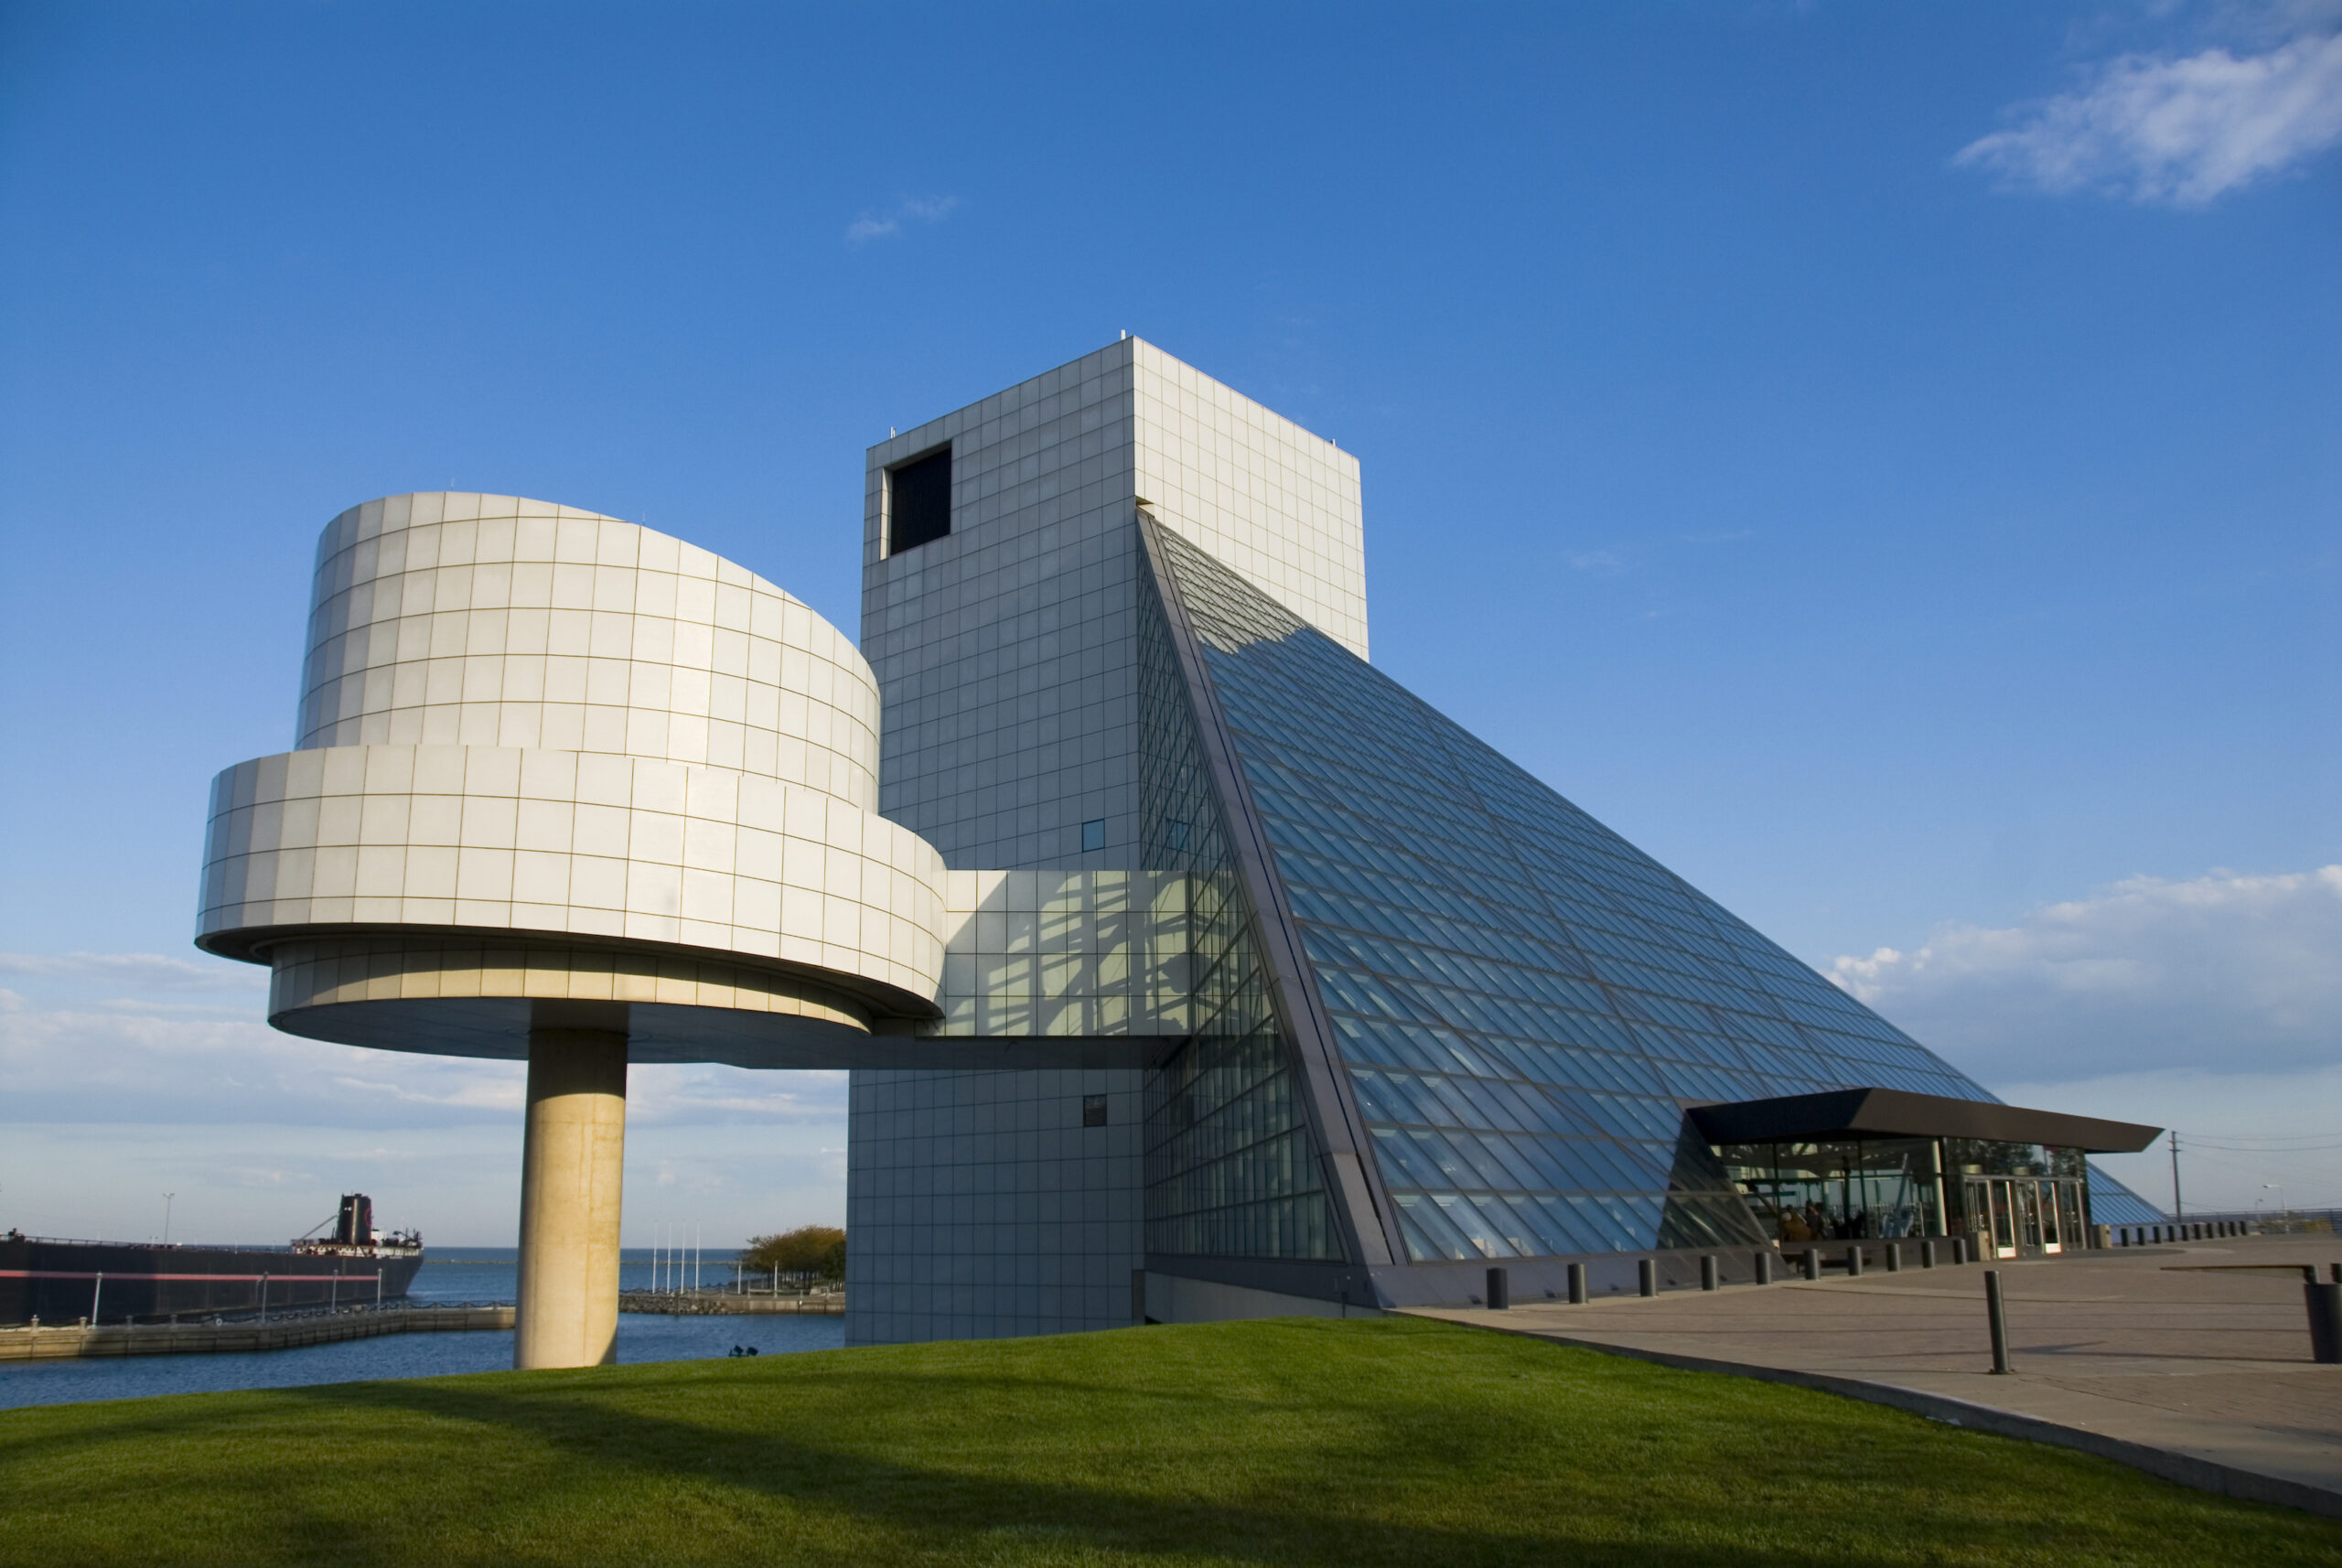 Hall of Fame wing side. Photo Copyright: The Rock & Roll Hall of Fame